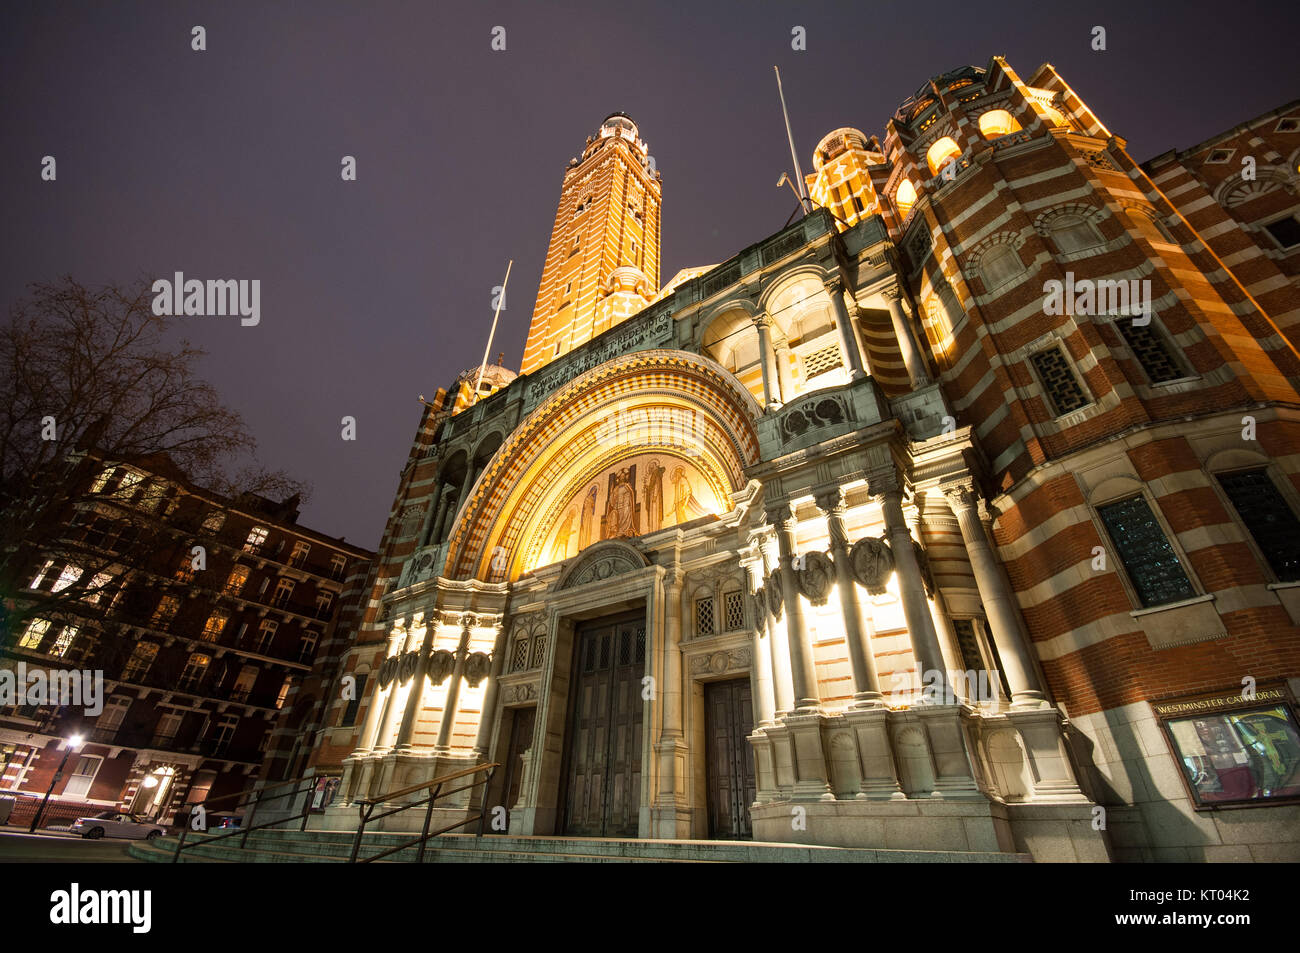 London, England, UK - December 1, 2009: The byzantine architecture of Westminster Roman Catholic Cathedral lit up at night. Stock Photo